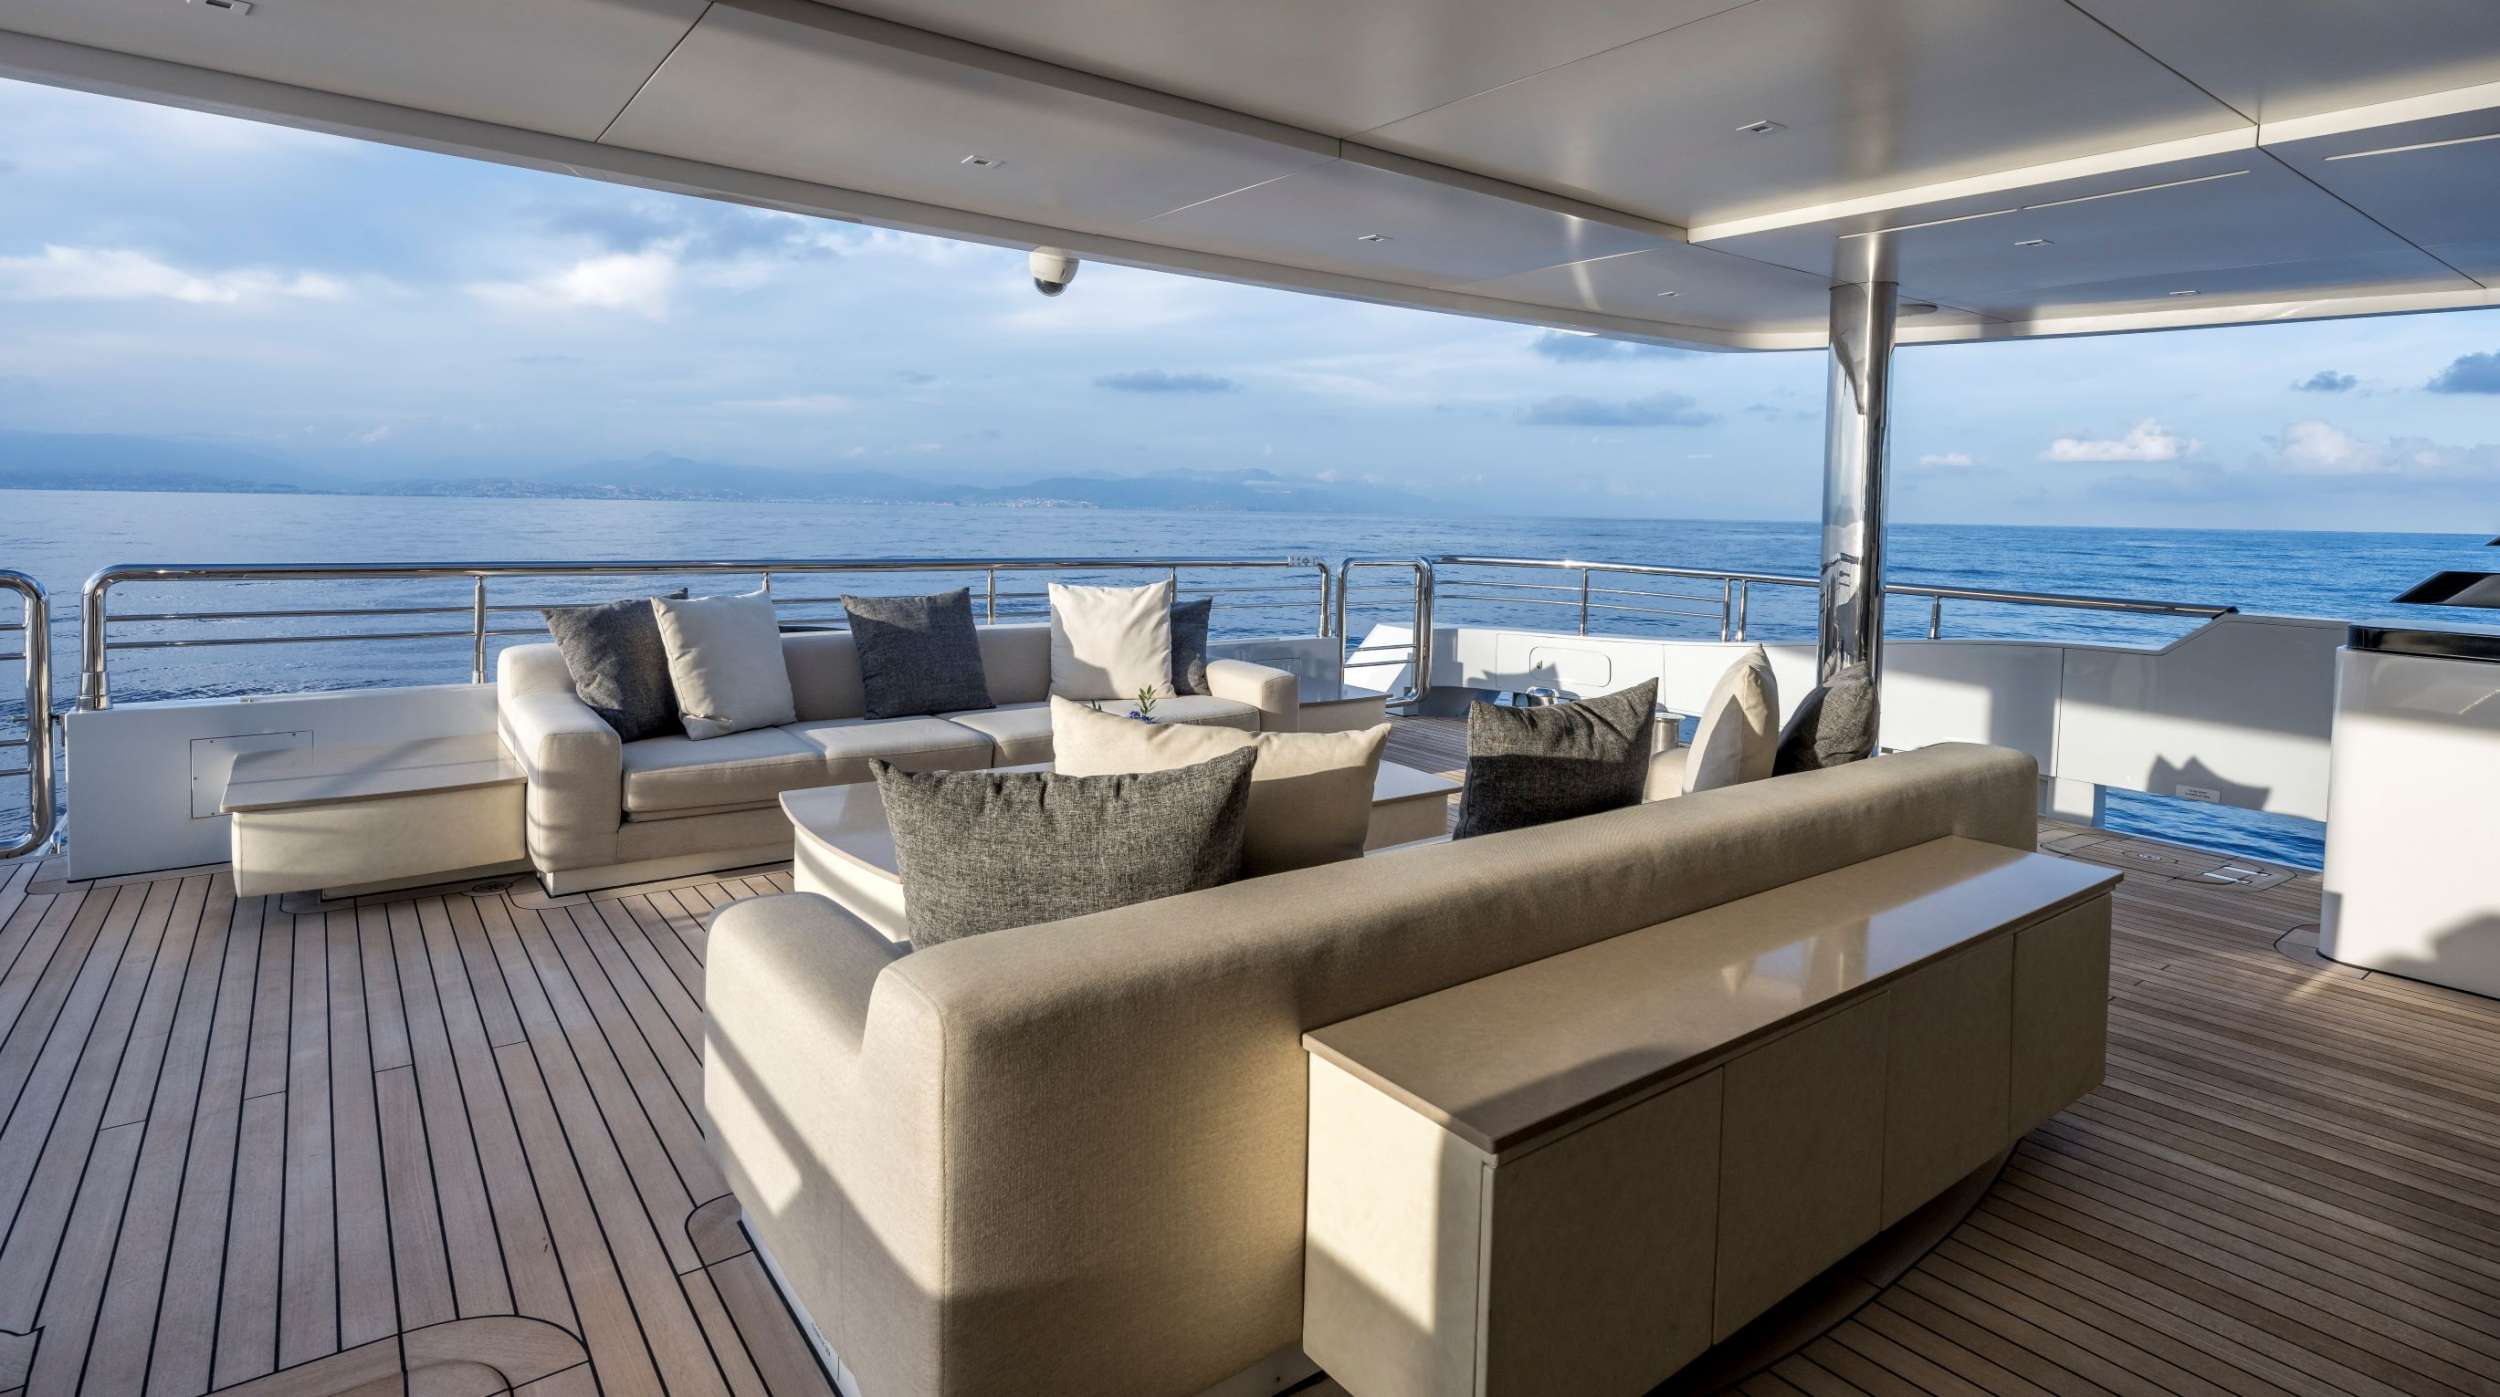 NAVIS ONE - Superyacht charter Thailand & Boat hire in Summer: W. Med -Naples/Sicily, Greece, W. Med -Riviera/Cors/Sard., Turkey, W. Med - Spain/Balearics, Croatia | Winter: Indian Ocean and SE Asia, Red Sea, United Arab Emirates 4